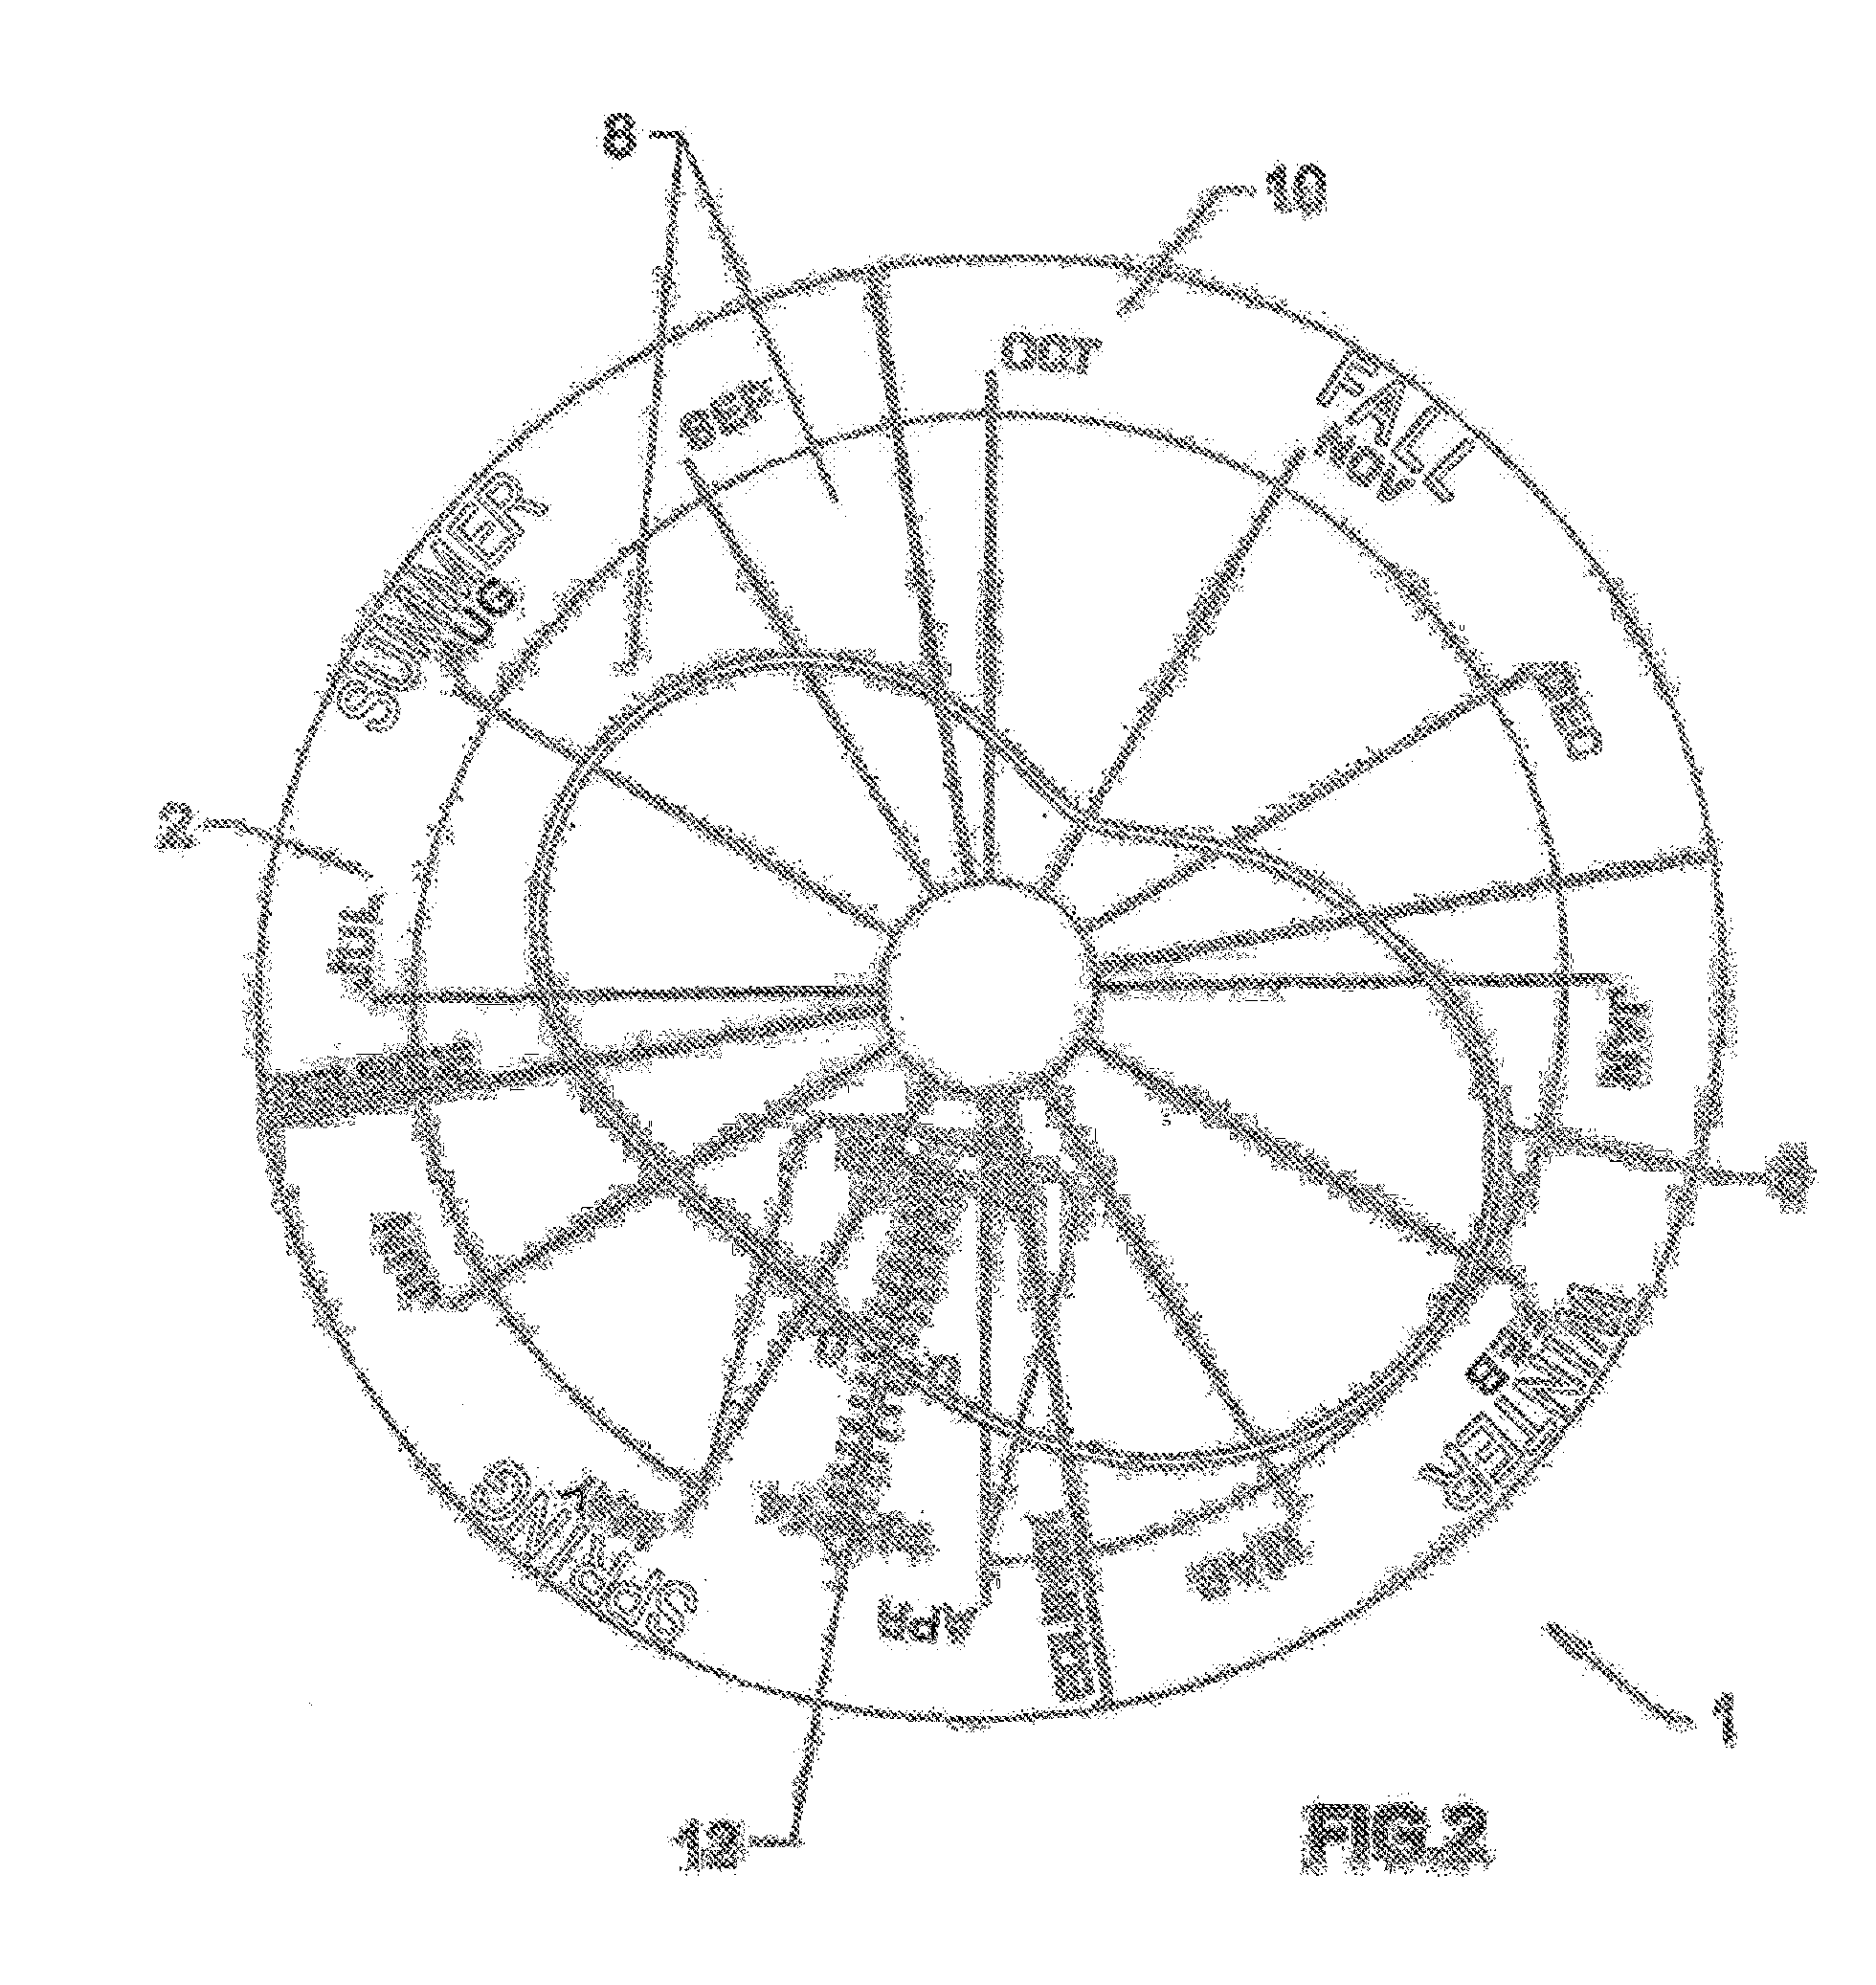 Timepiece comprising a device for displaying the equation of time